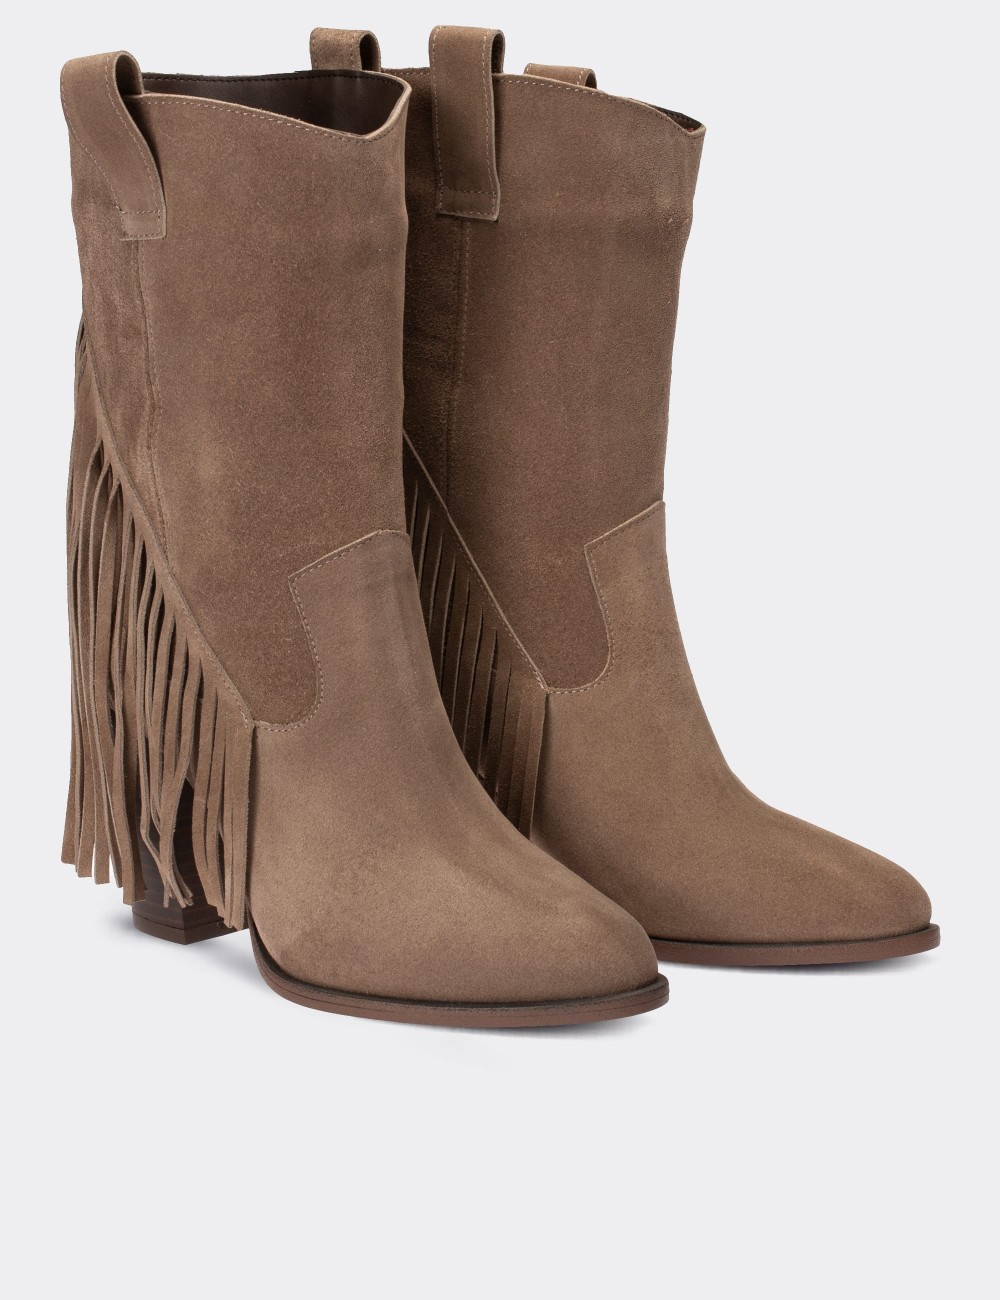 Sandstone Suede Leather Western Boots - E4467ZVZNC01